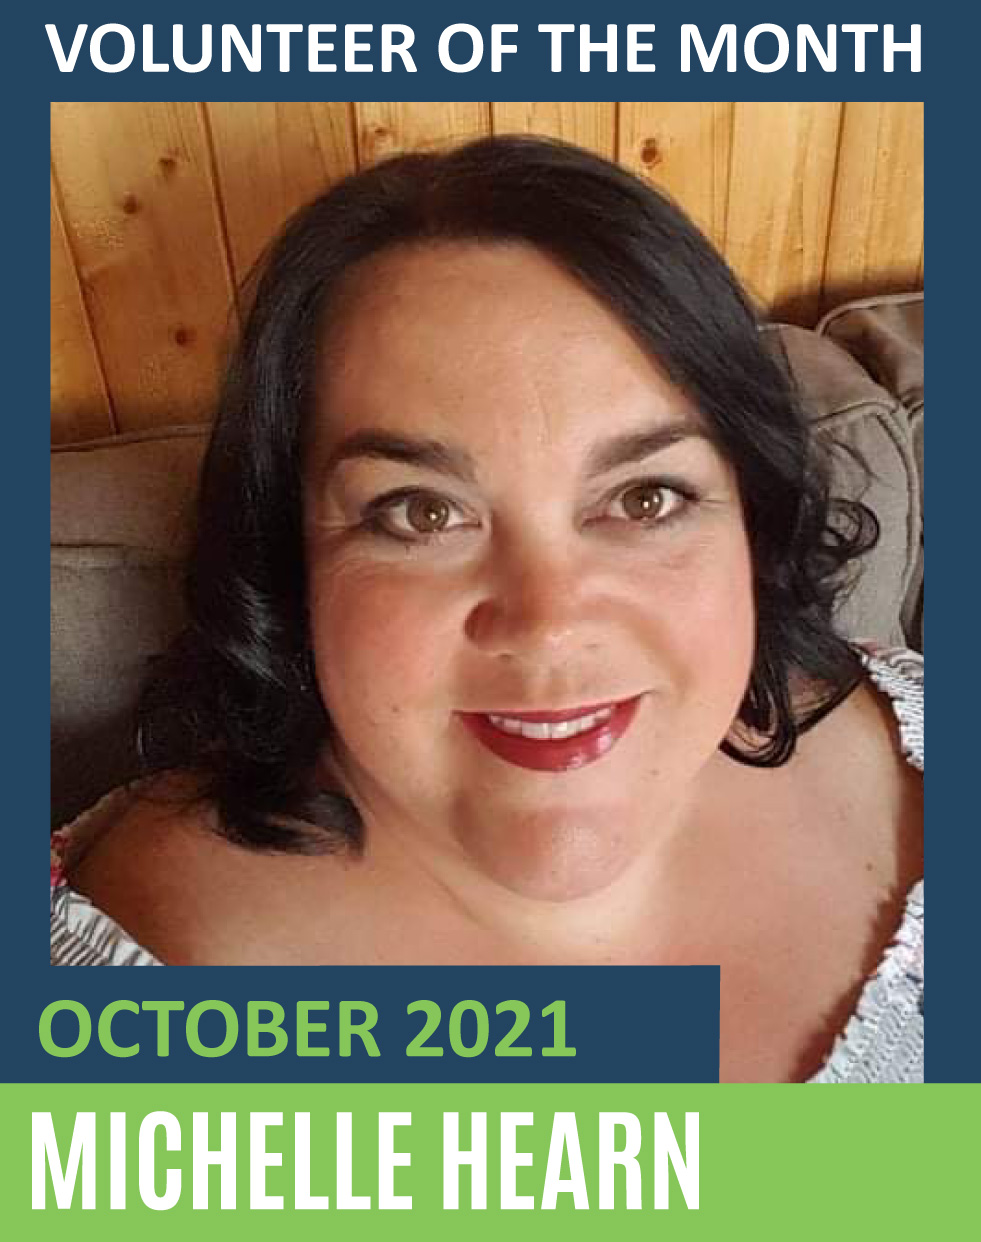 October 2021 Volunteer of the Month - Michelle Hearn